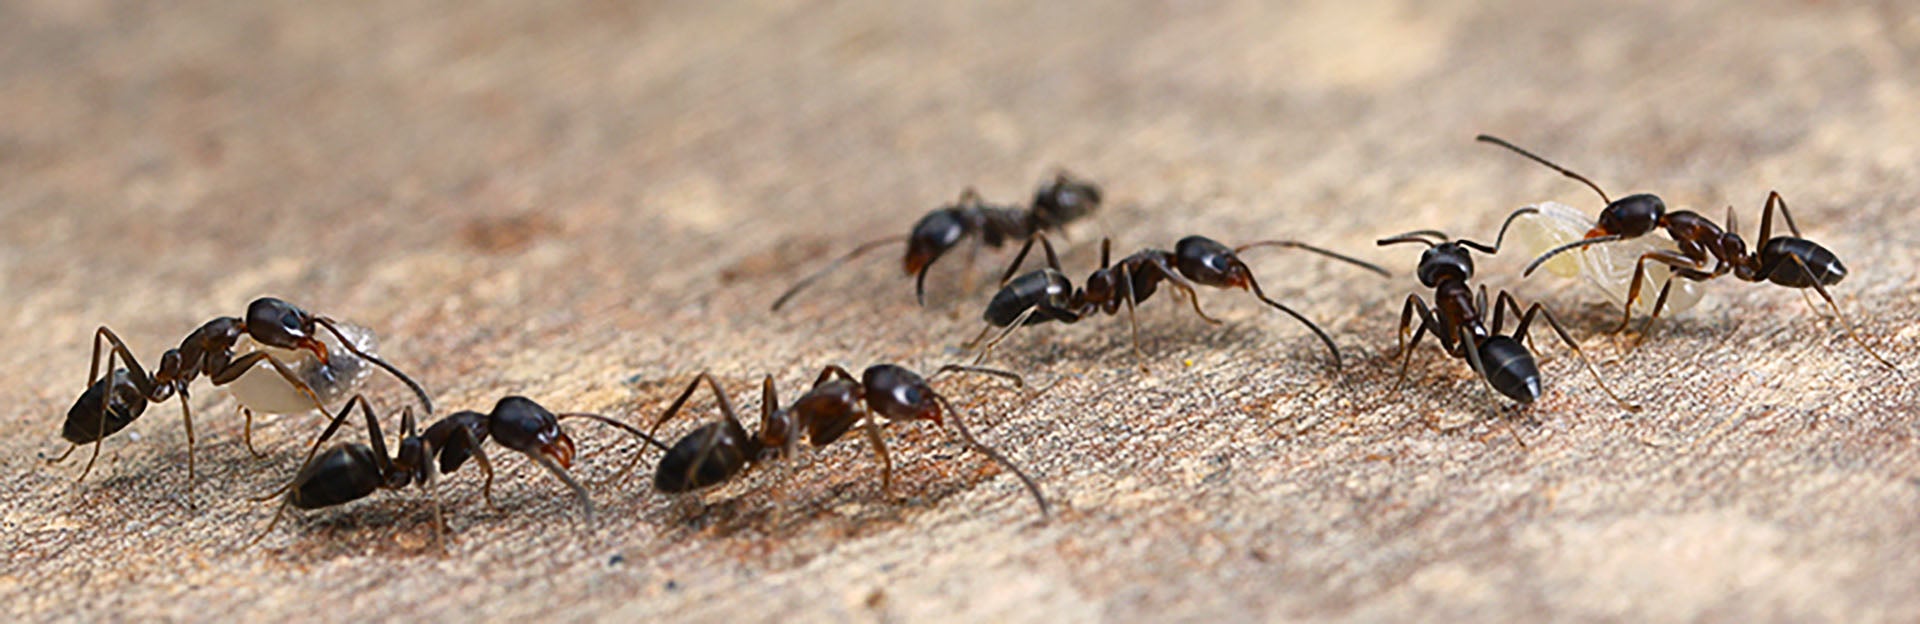 Argentine ants trailing